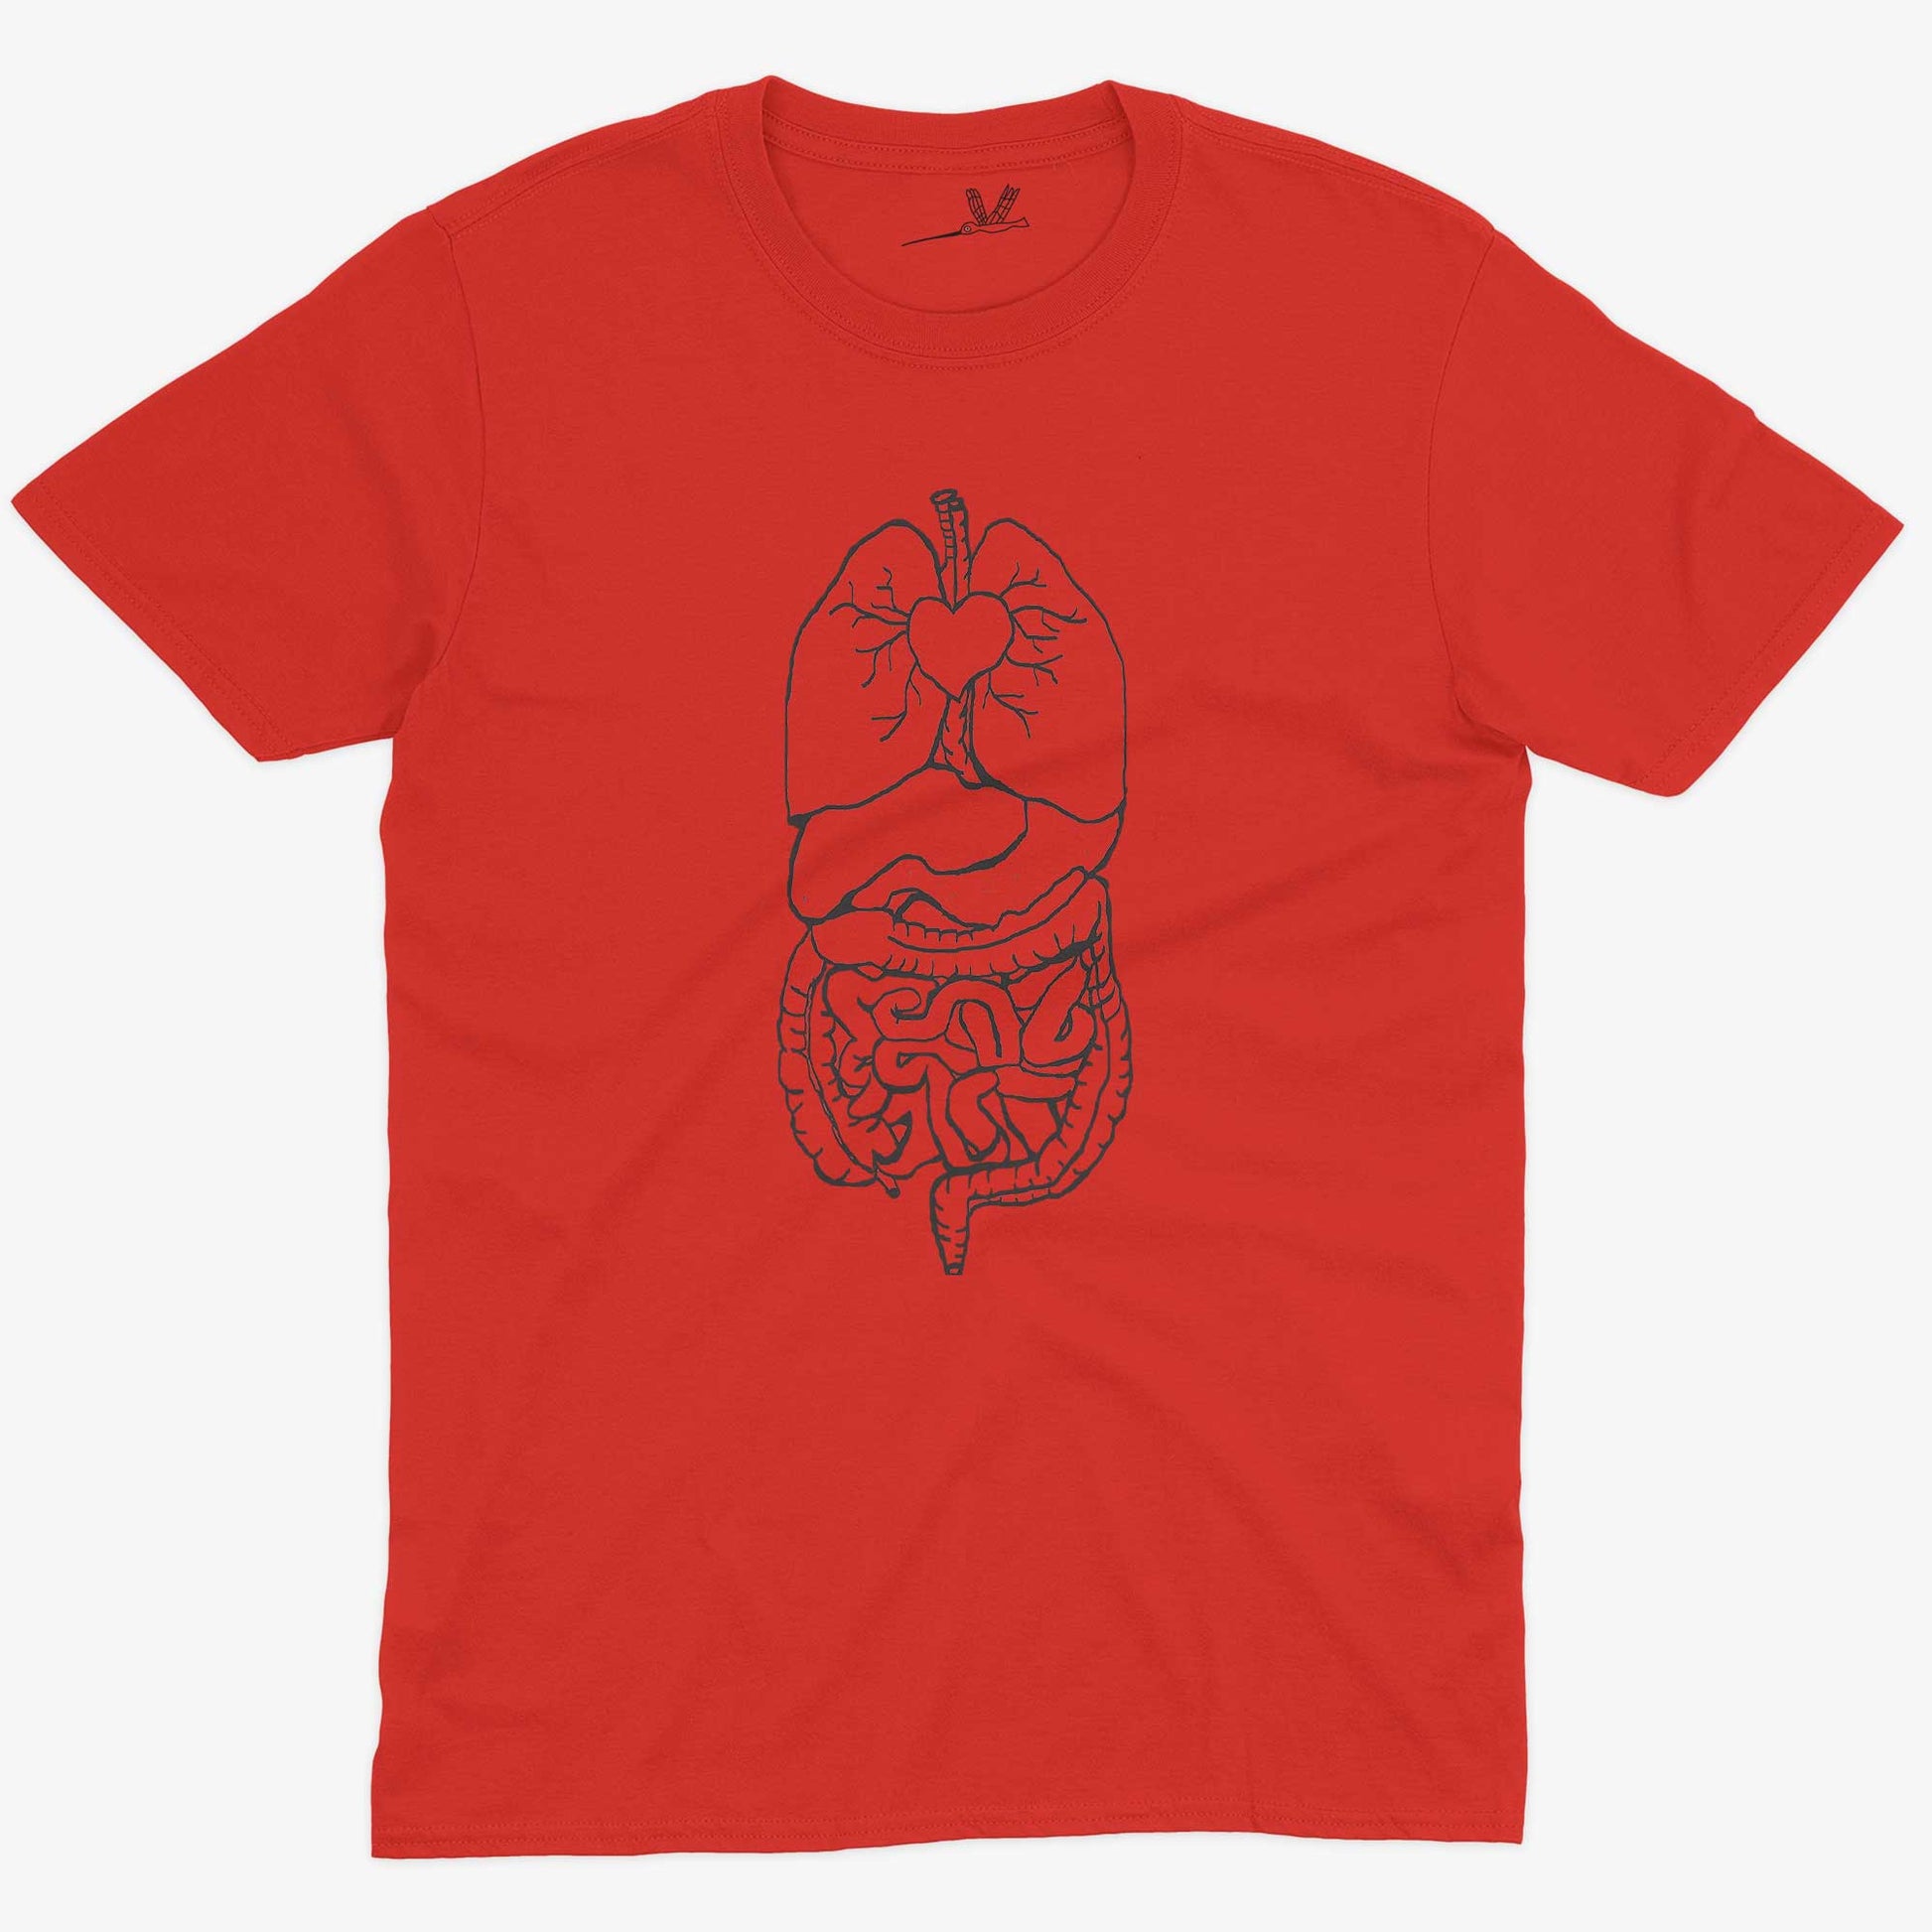 Digestive System Unisex Or Women's Cotton T-shirt-Red-Unisex